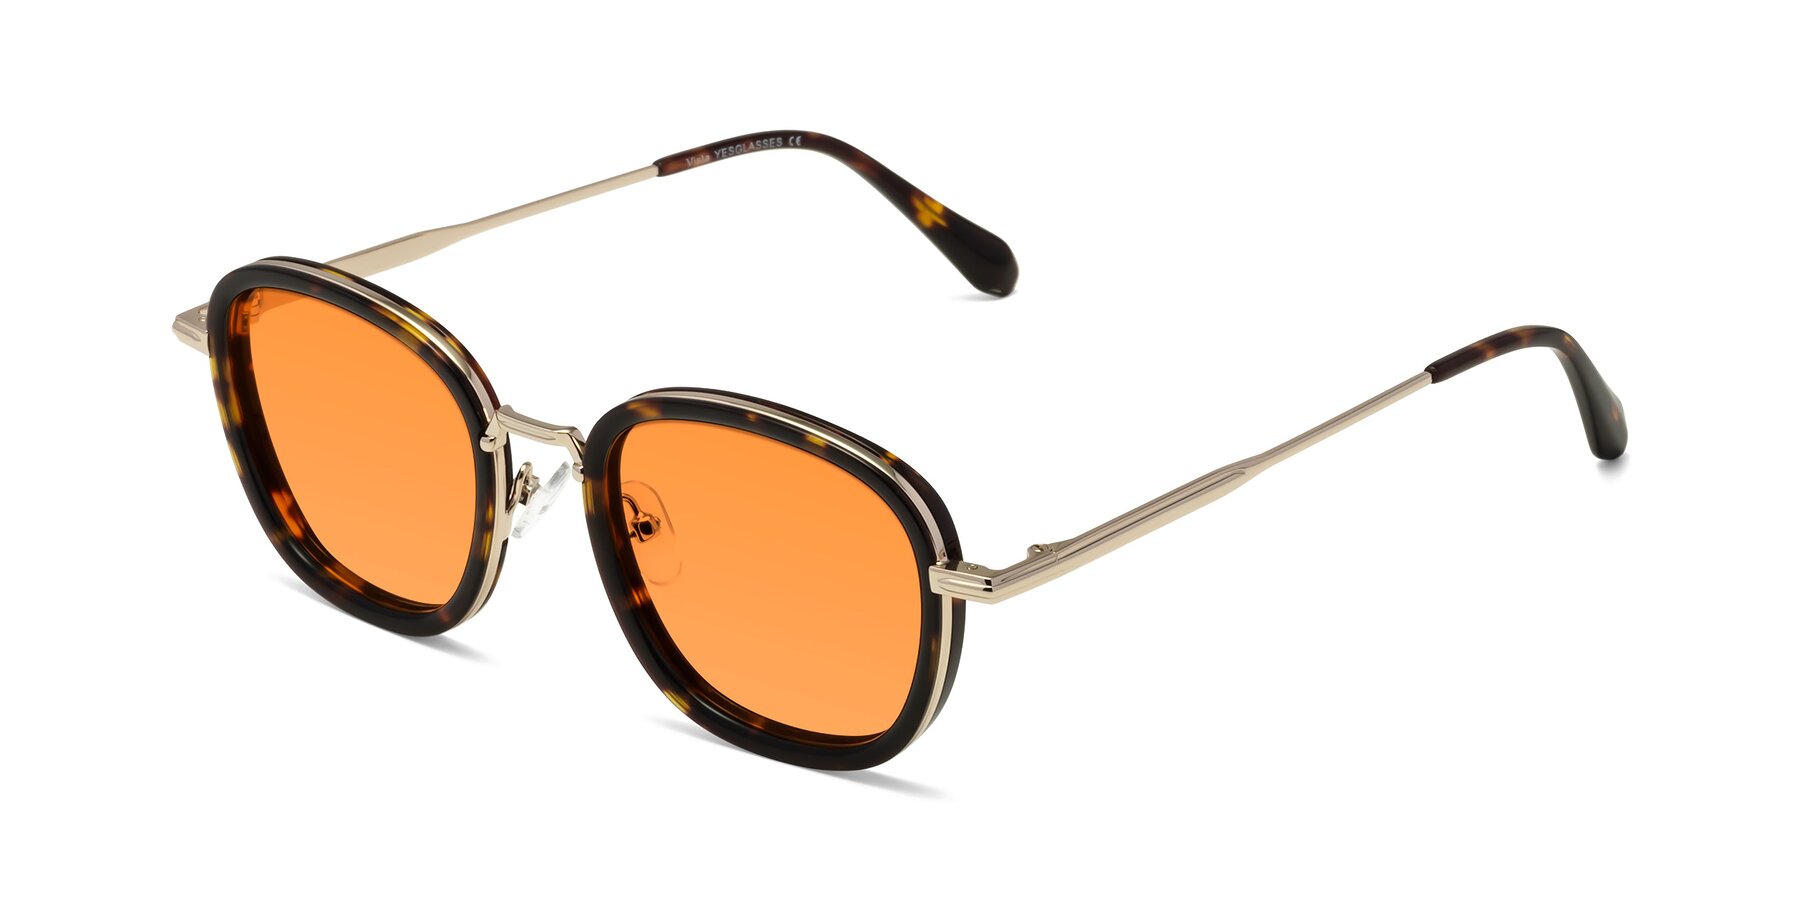 Angle of Vista in Tortoise-Light Gold with Orange Tinted Lenses